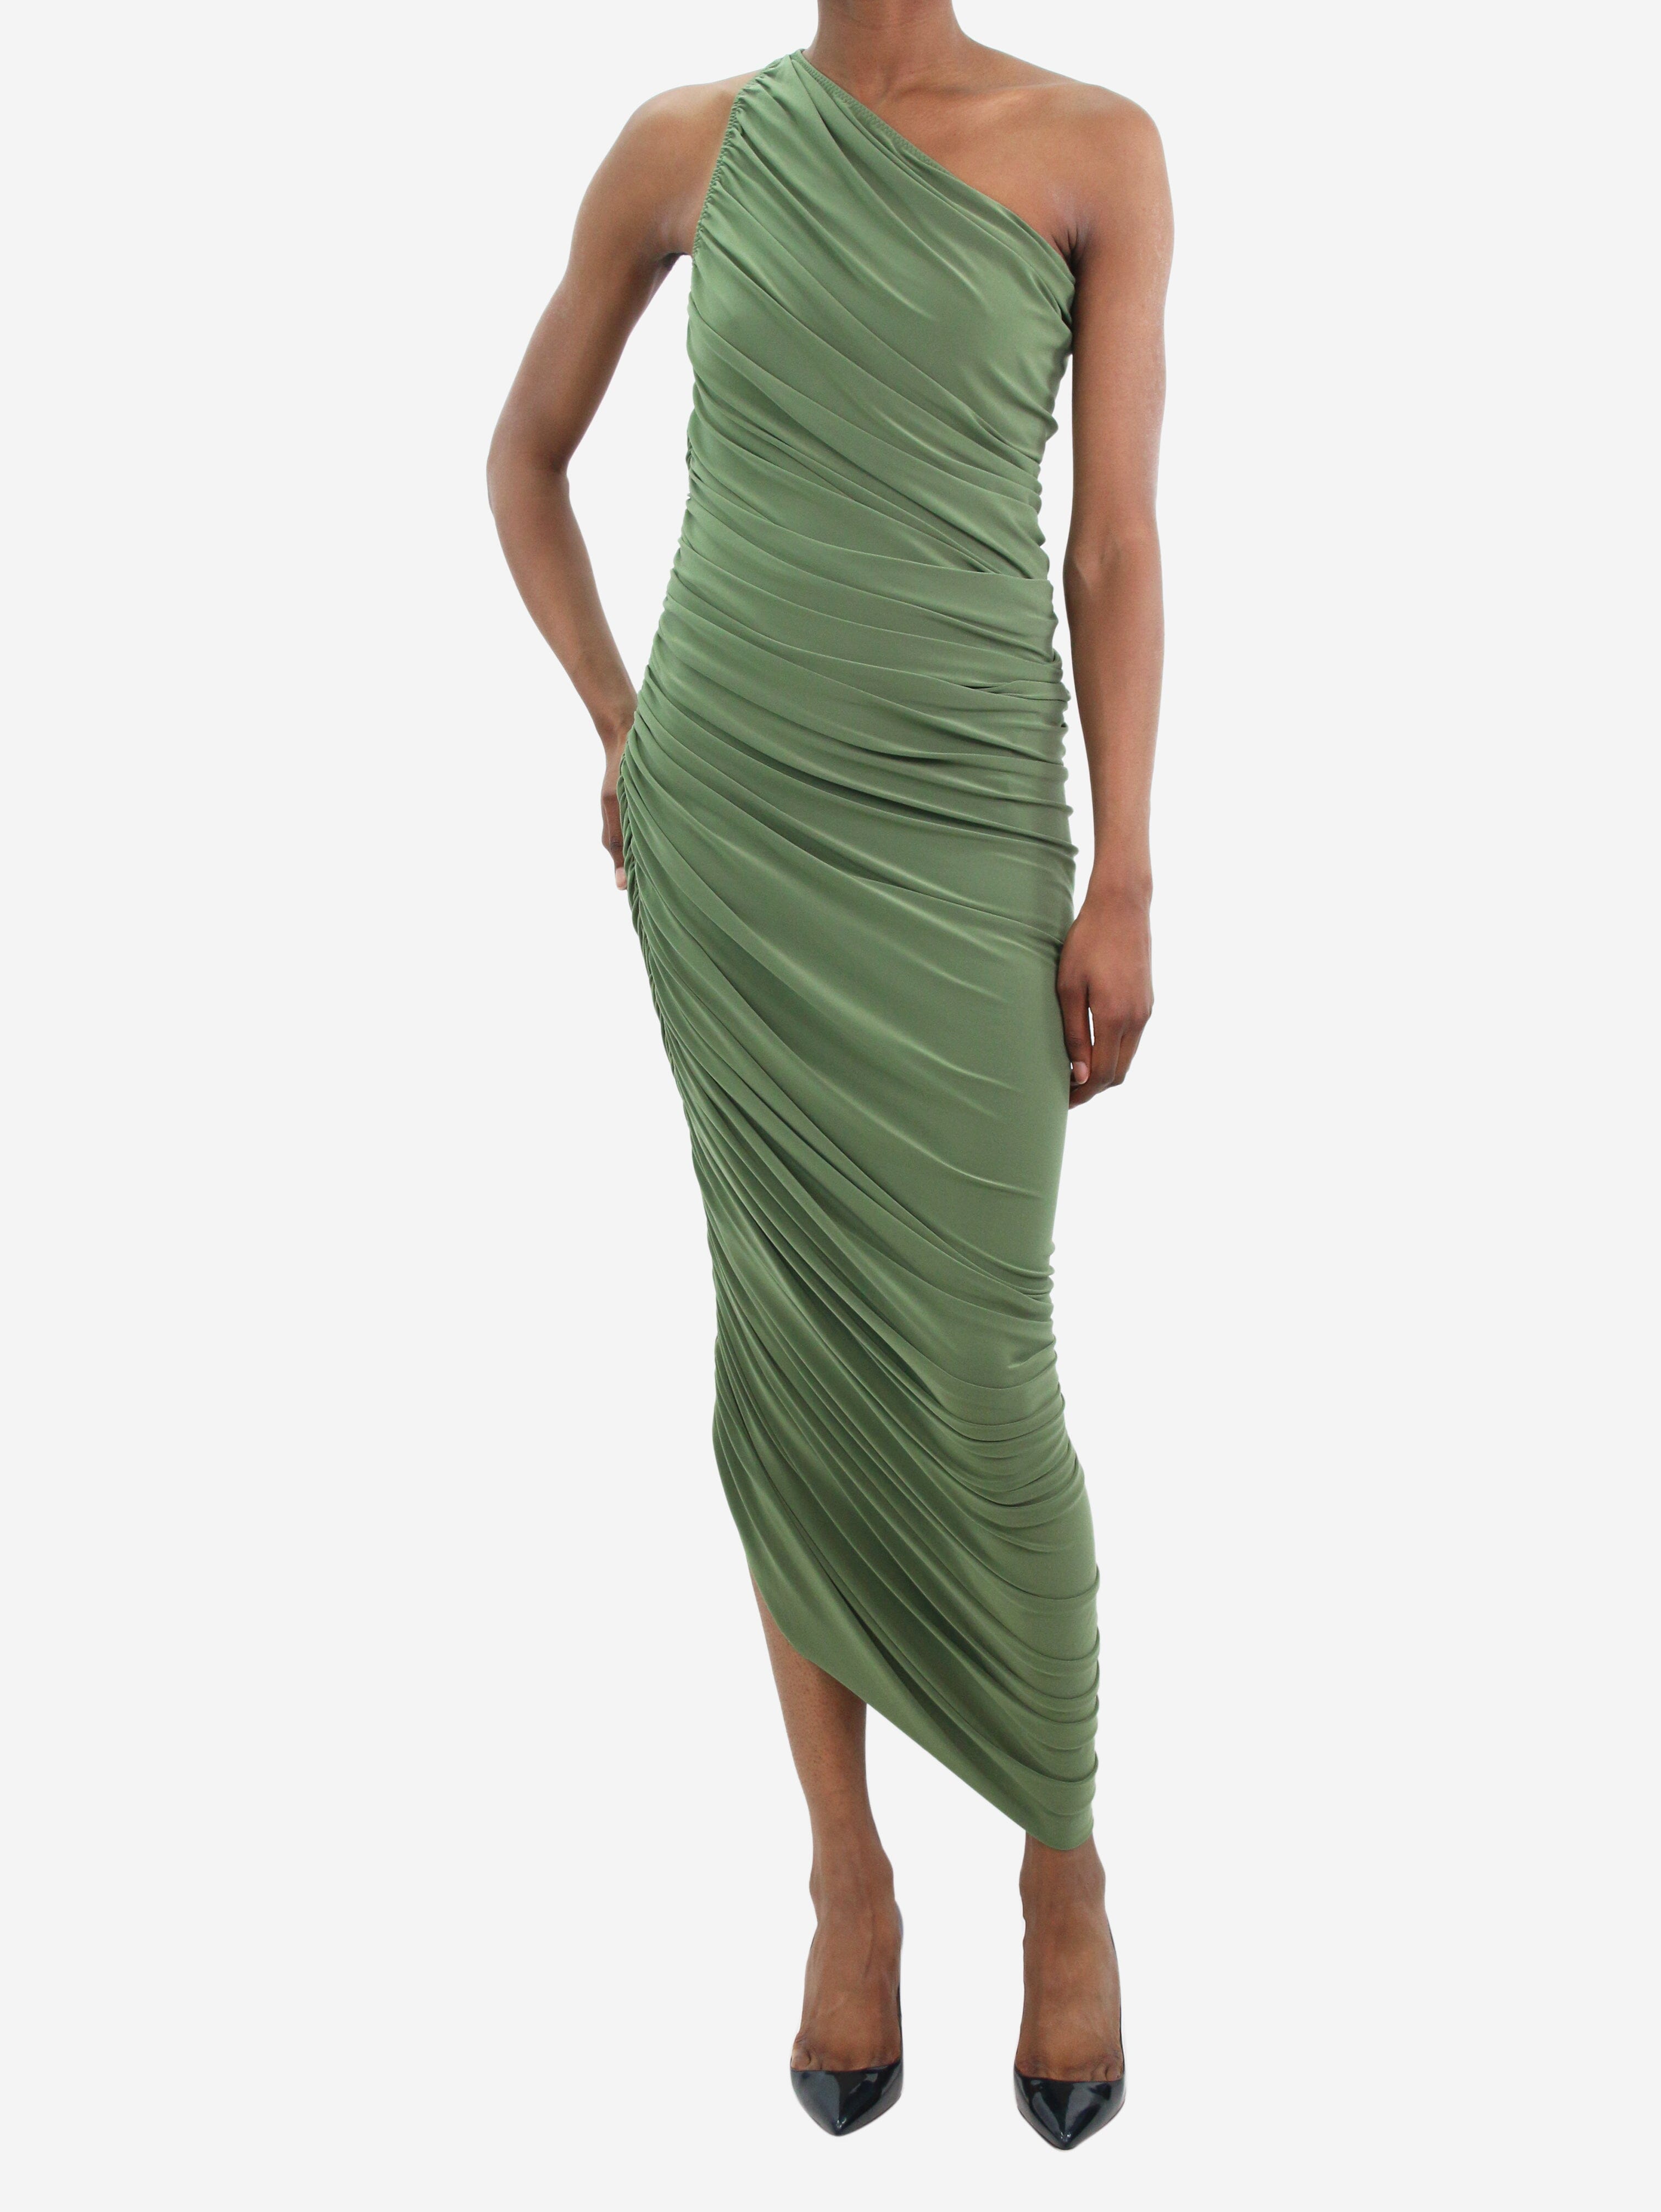 Green one-shoulder ruched dress - size XS